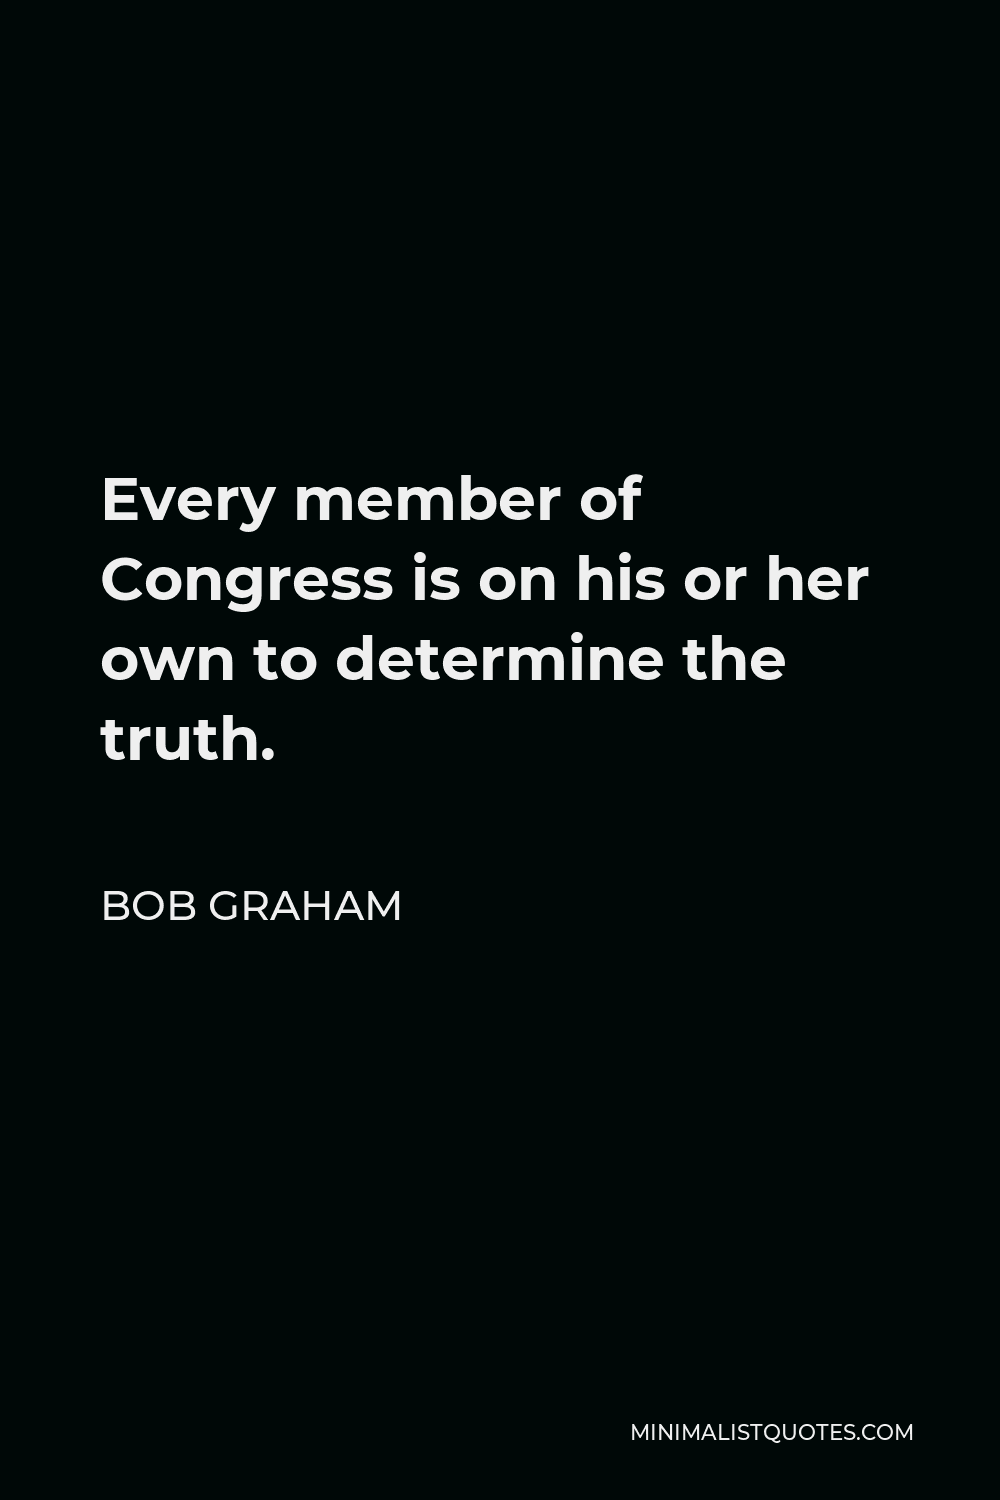 Bob Graham Quote - Every member of Congress is on his or her own to determine the truth.